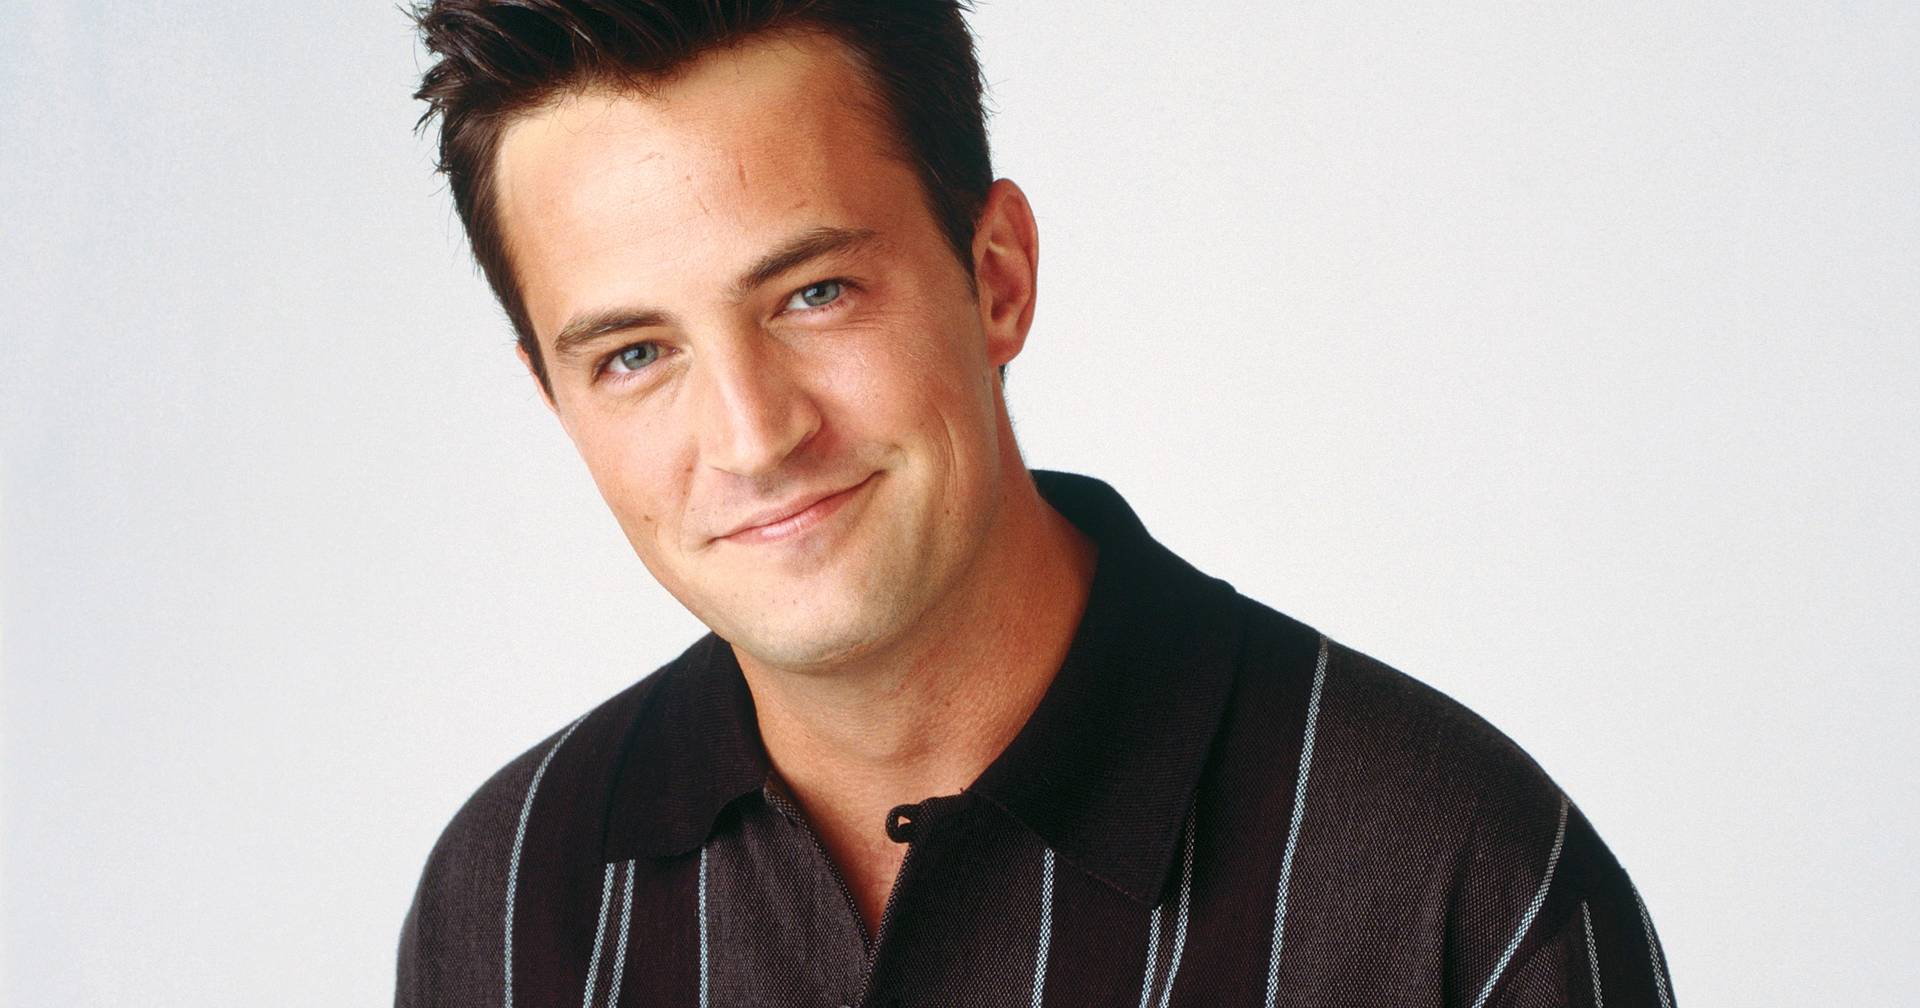 “Friends” actor Matthew Perry has died